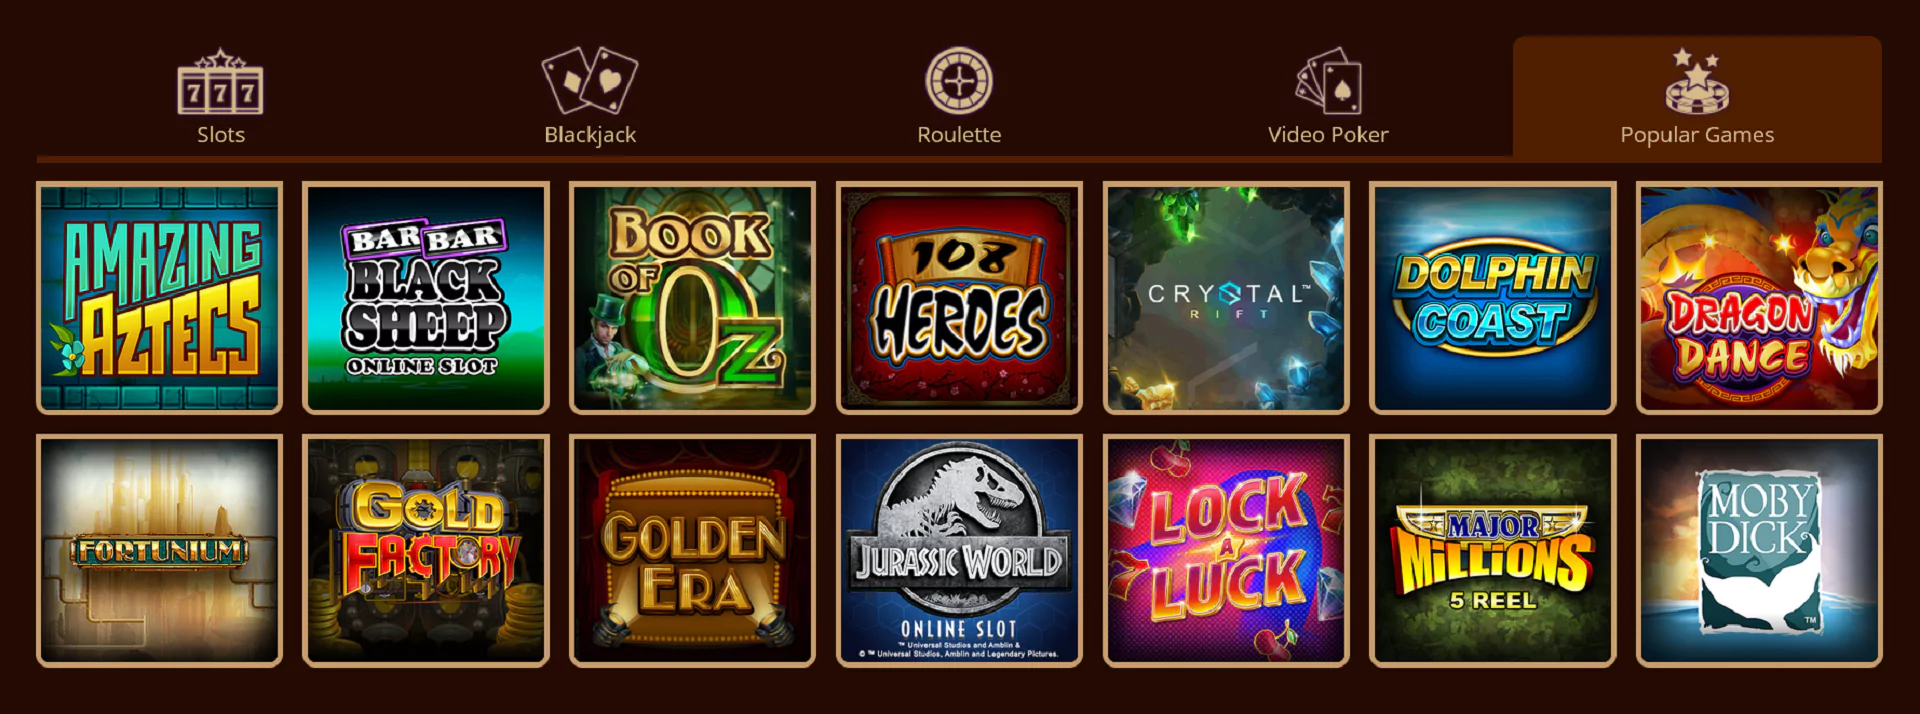 Screenshot of various games from the River Belle online casino site